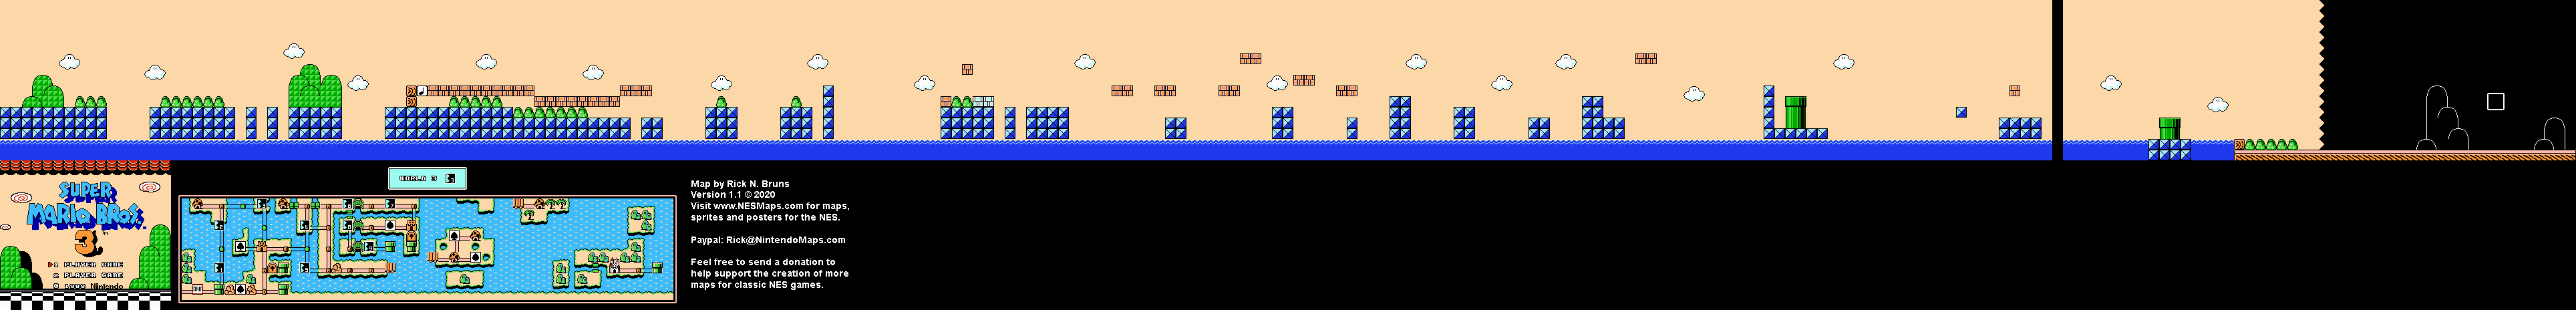 super mario bros 3 some usual day world maps